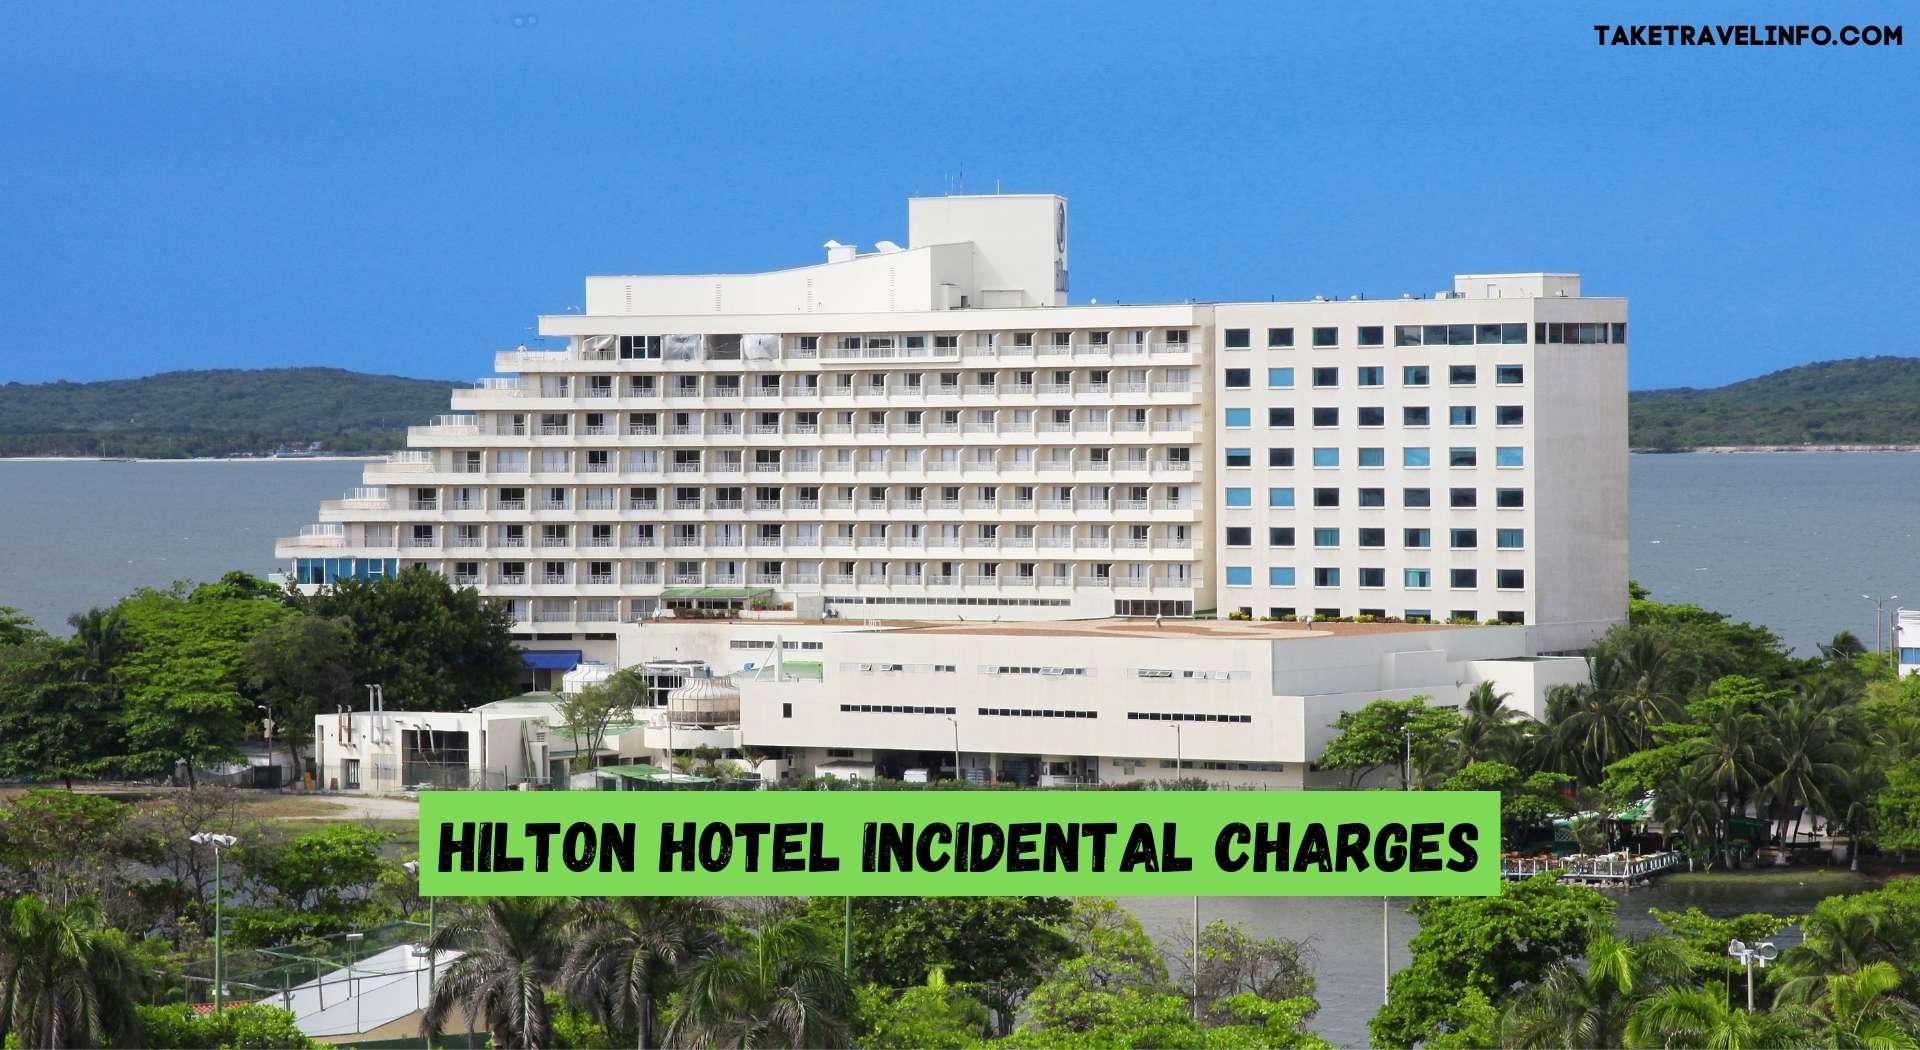 How Much Do Hotels Charge For Incidentals?